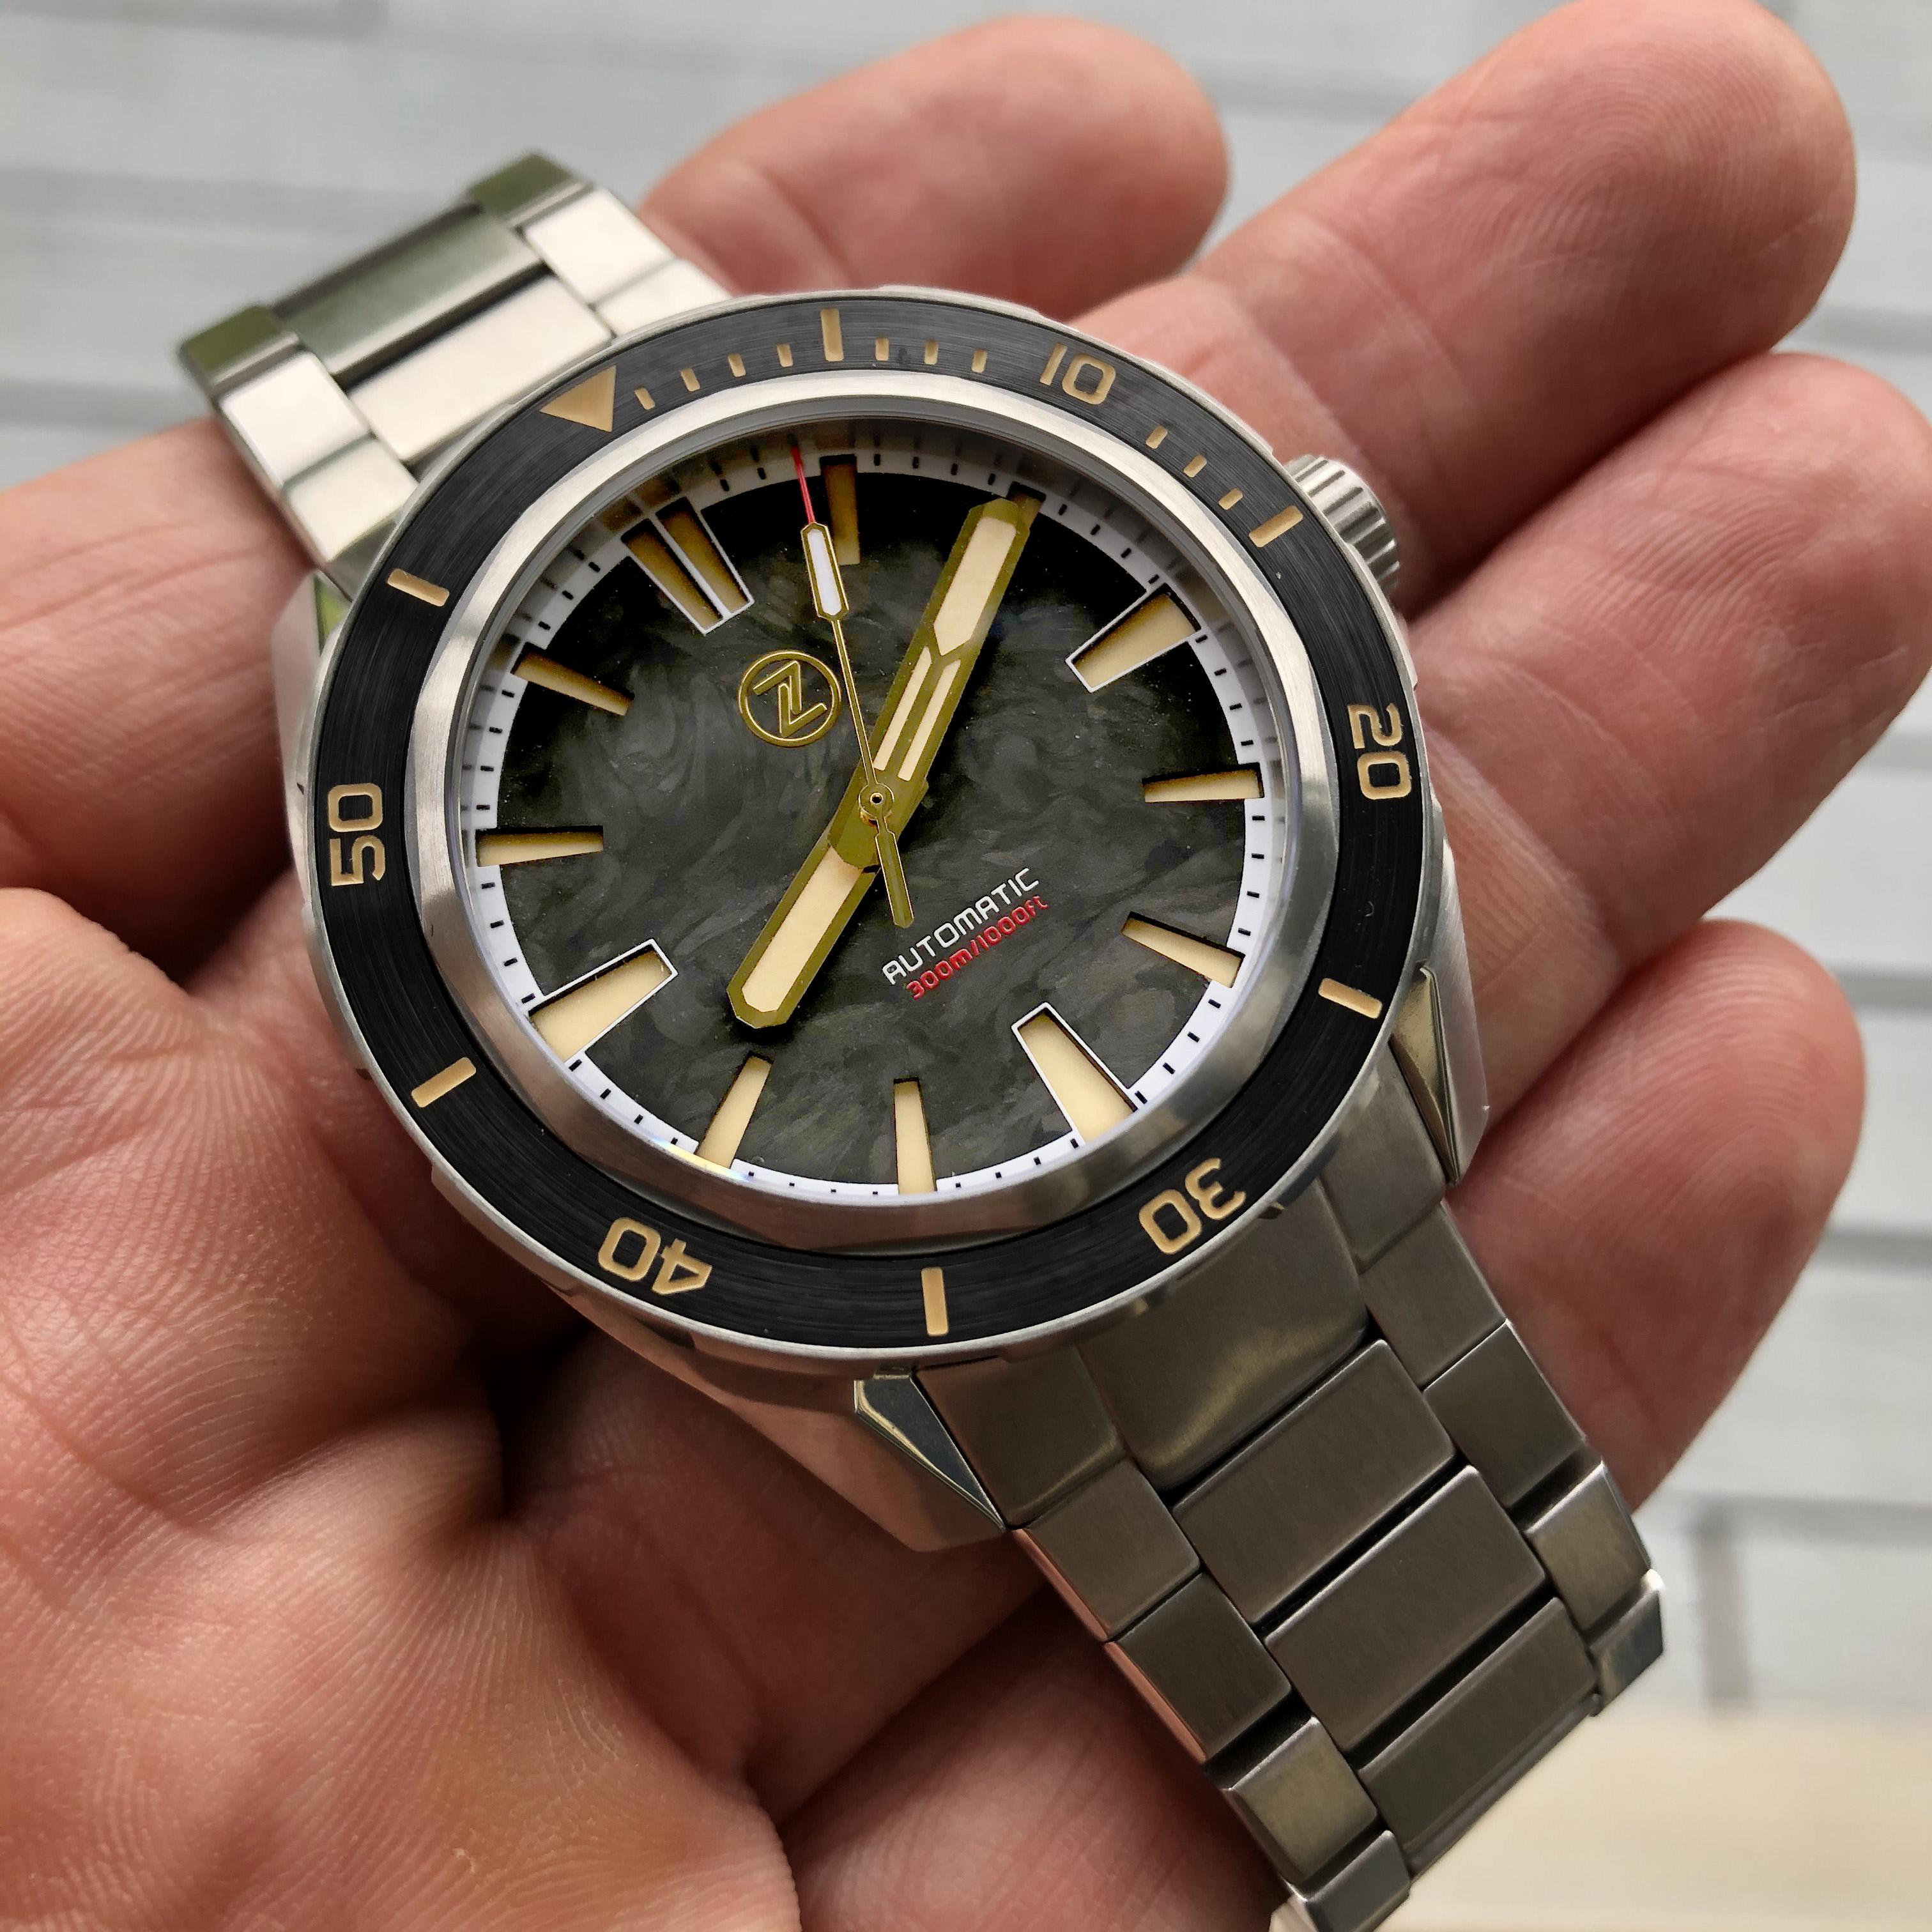 Why the Seiko NH35 is used by the best microbrands